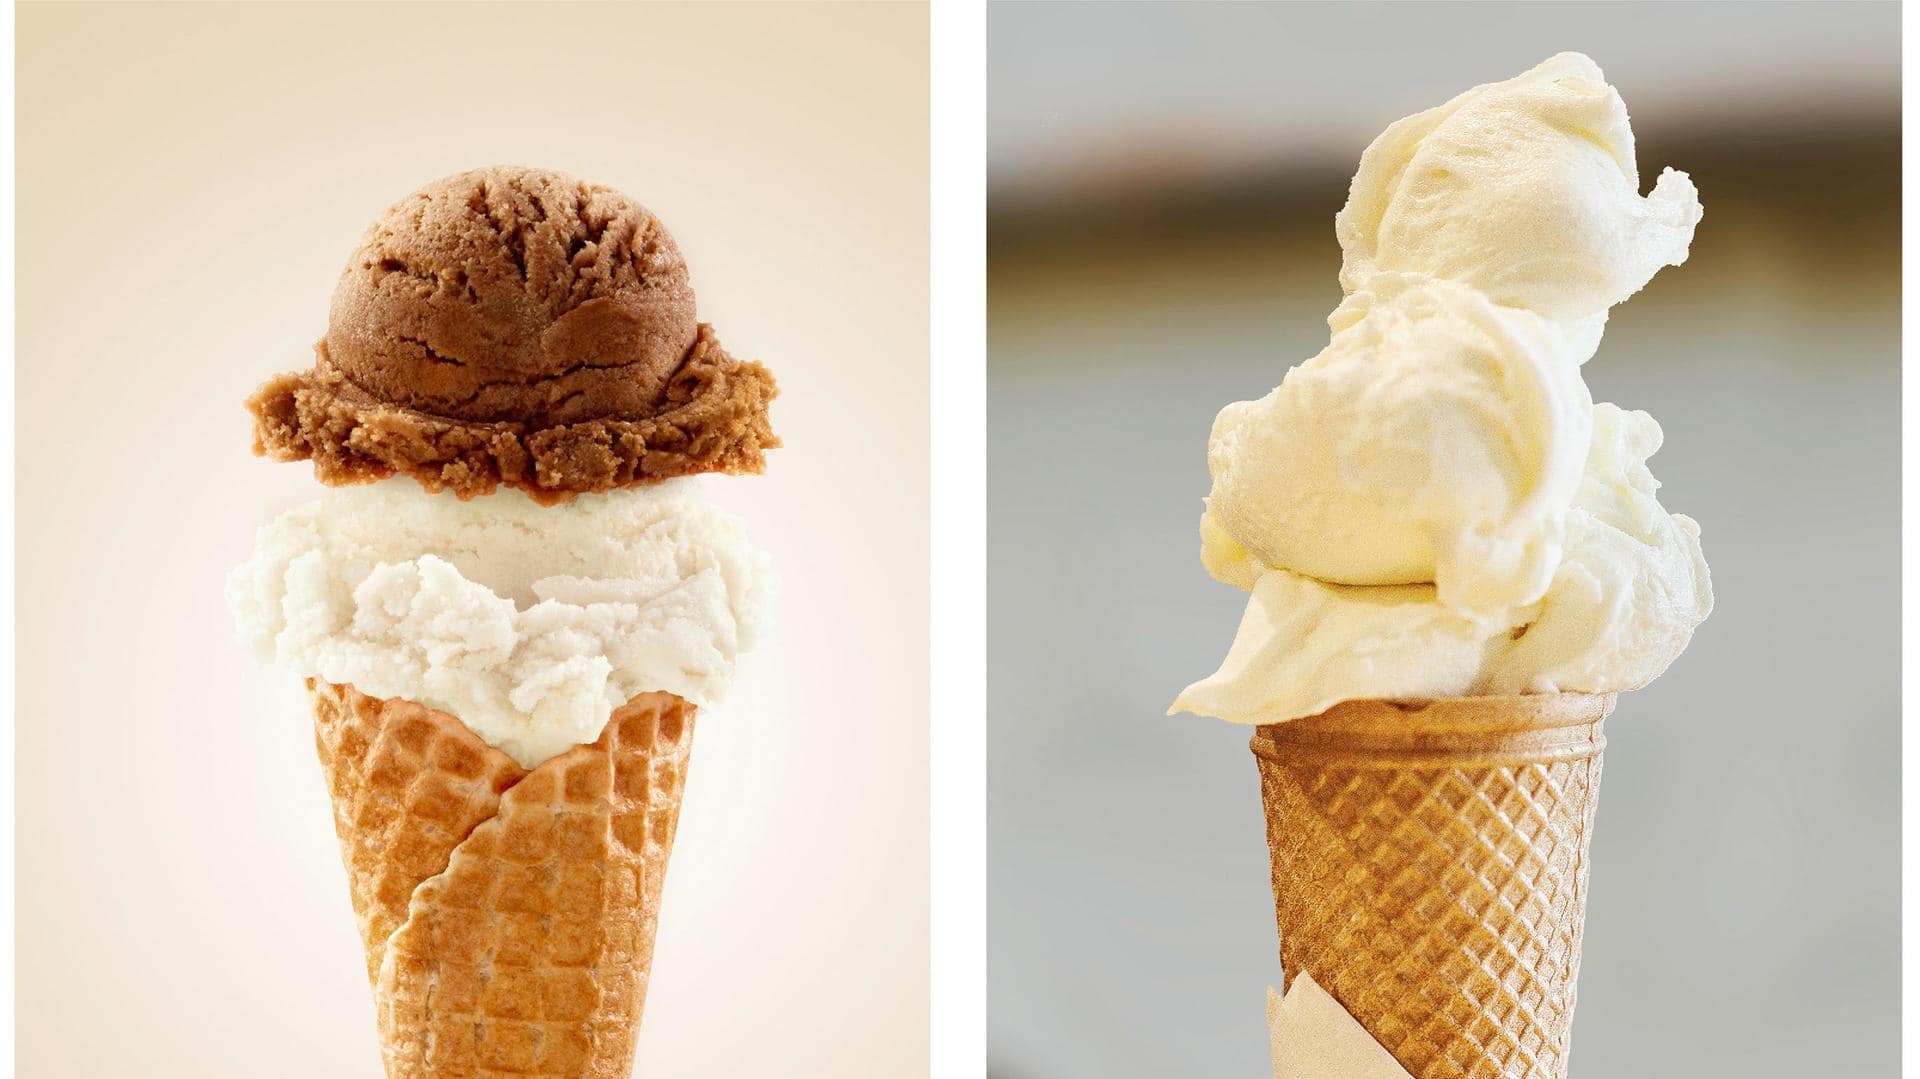 Know the difference between ice cream and gelato